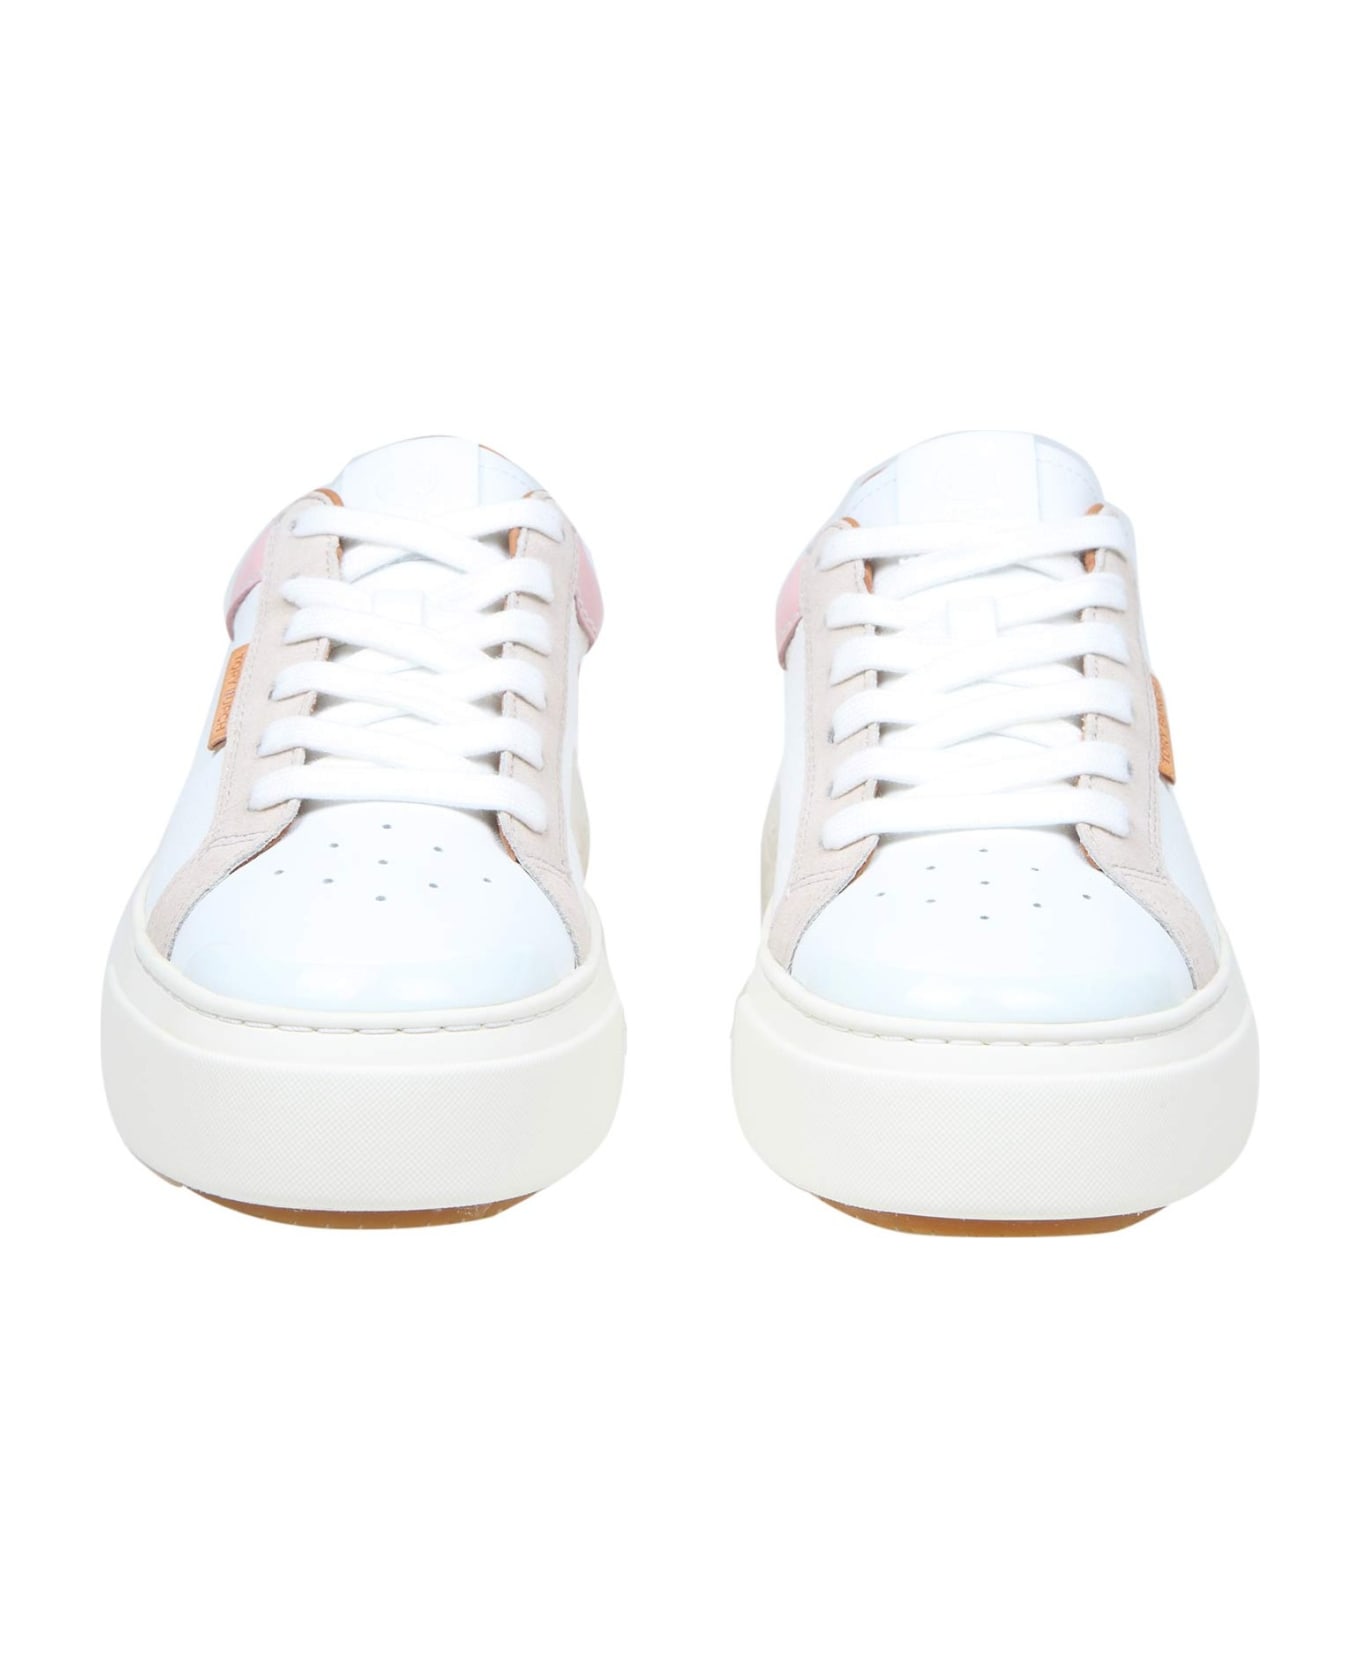 Tory Burch Ladybug Sneakers In White And Pink Leather - White/Rose